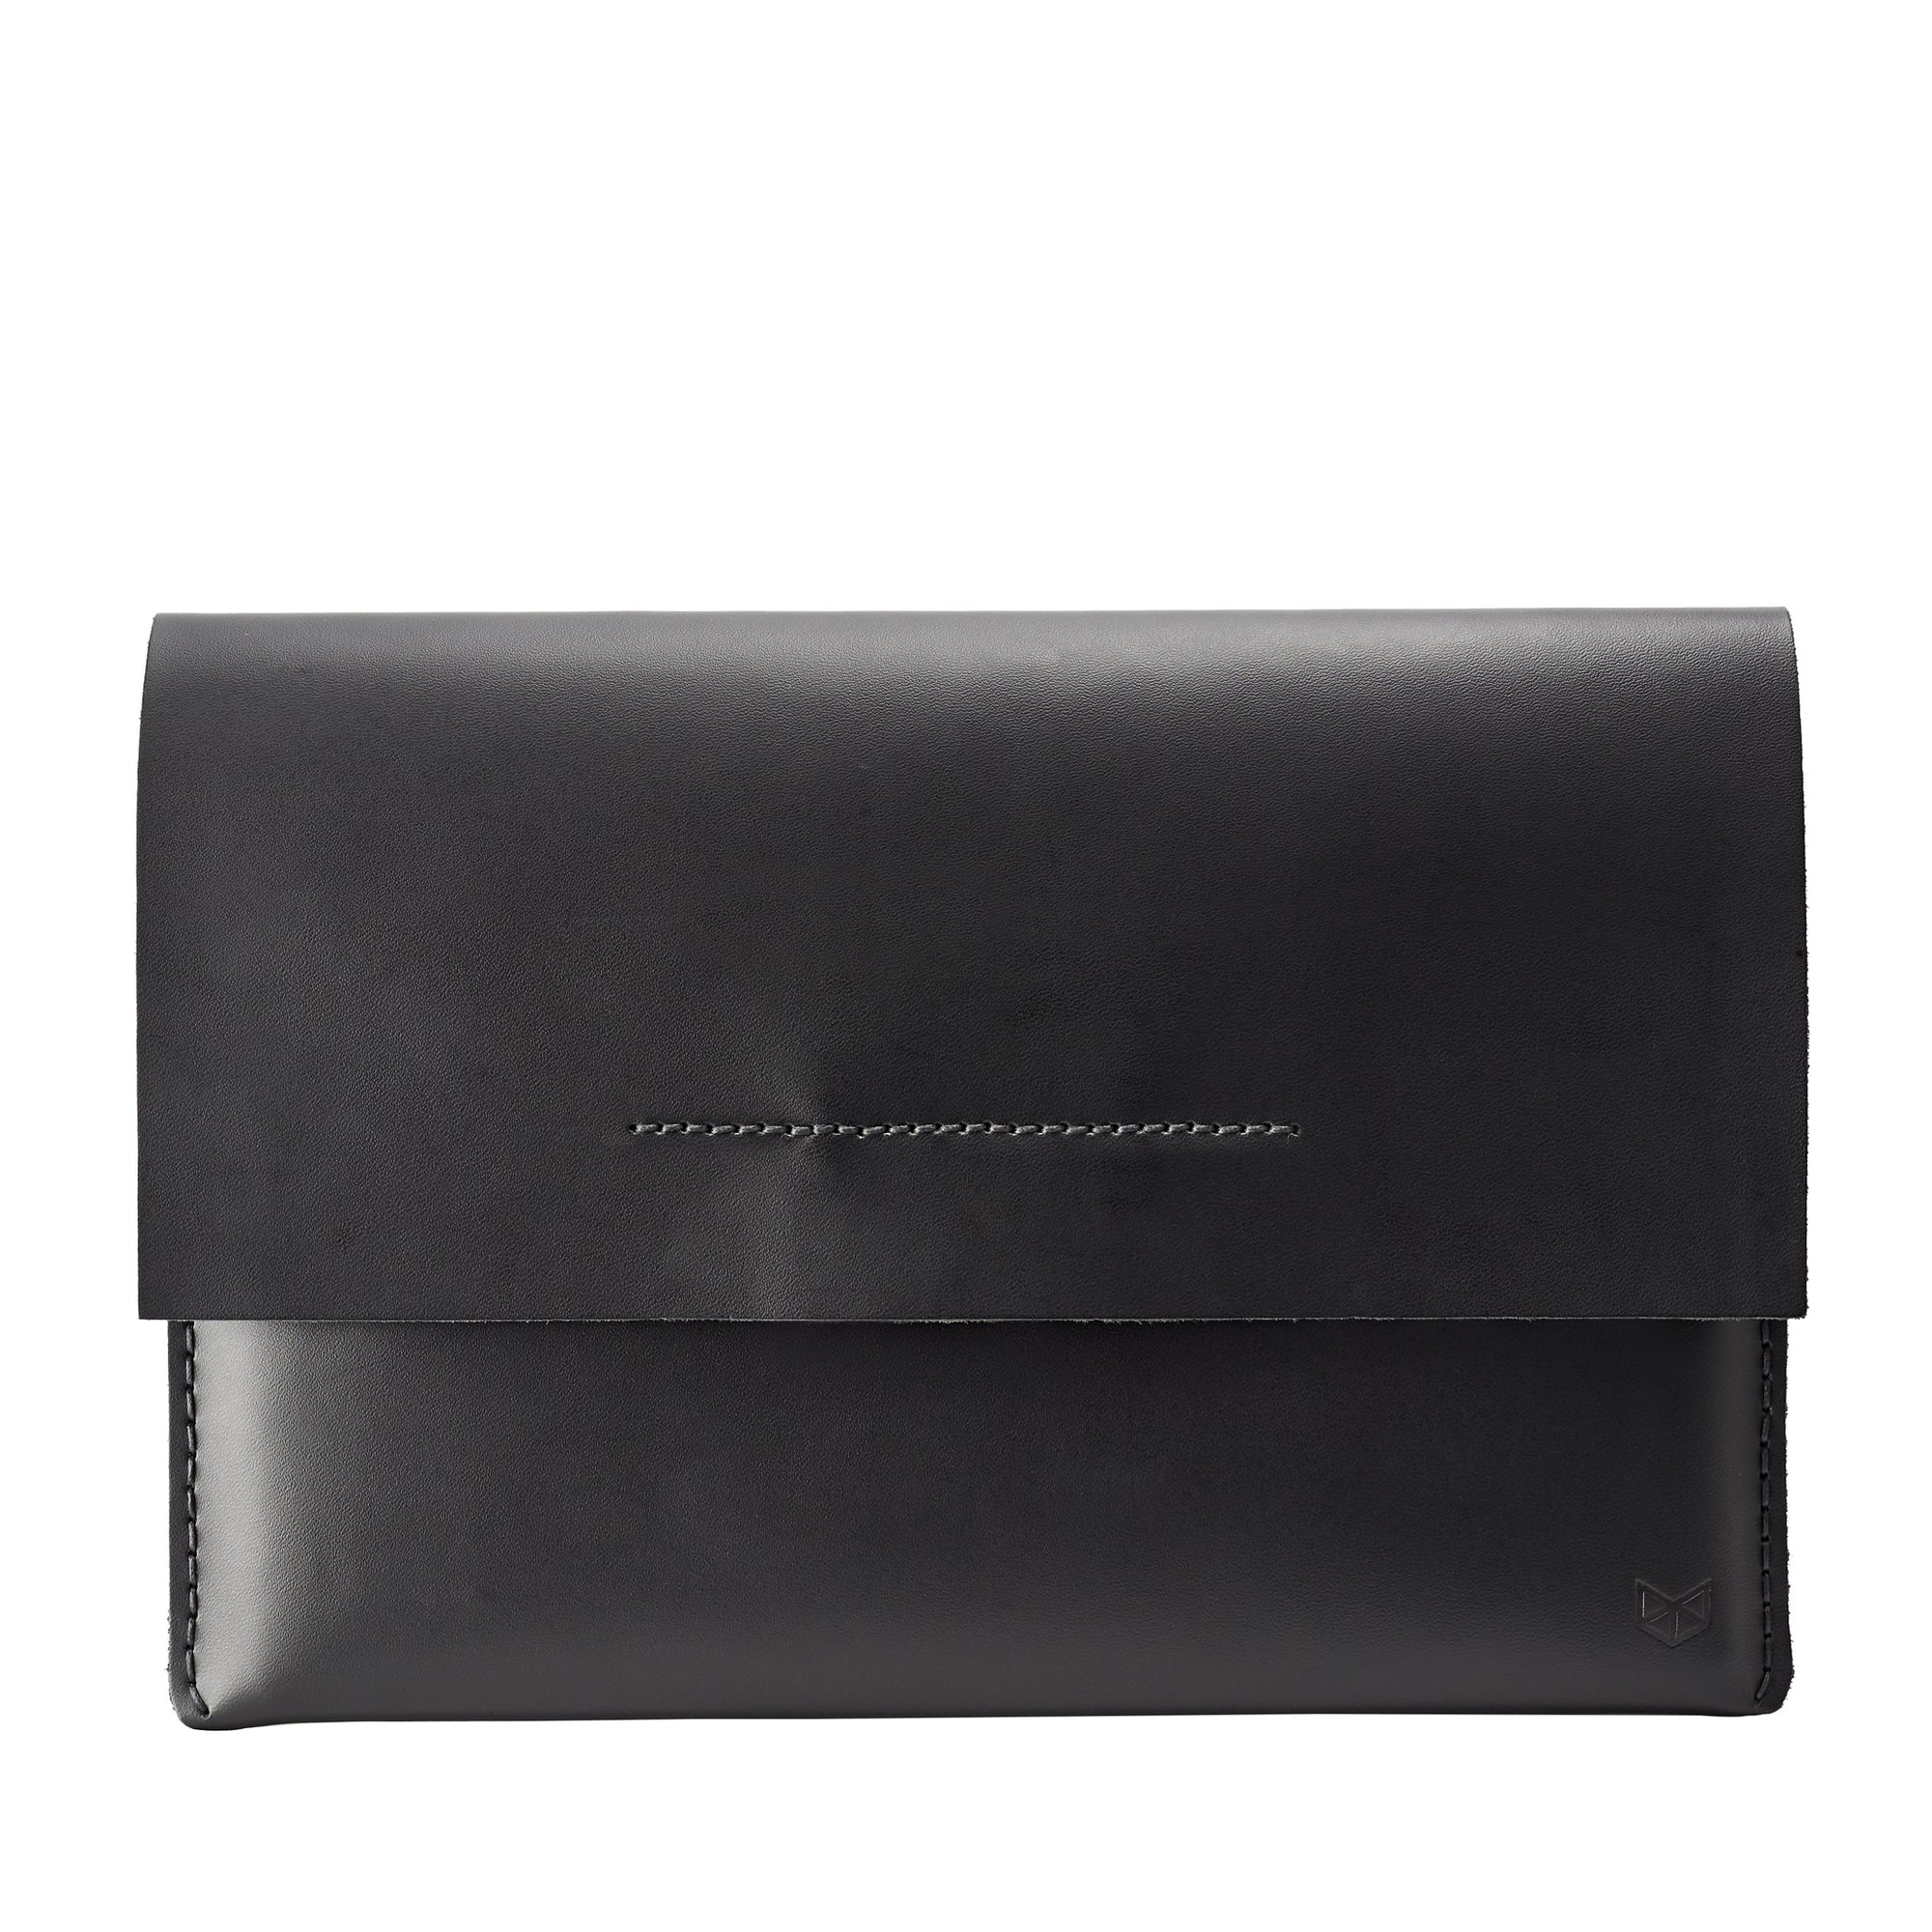 Closed. iPad Sleeve. Leather Case Black for iPad by Capra Leather